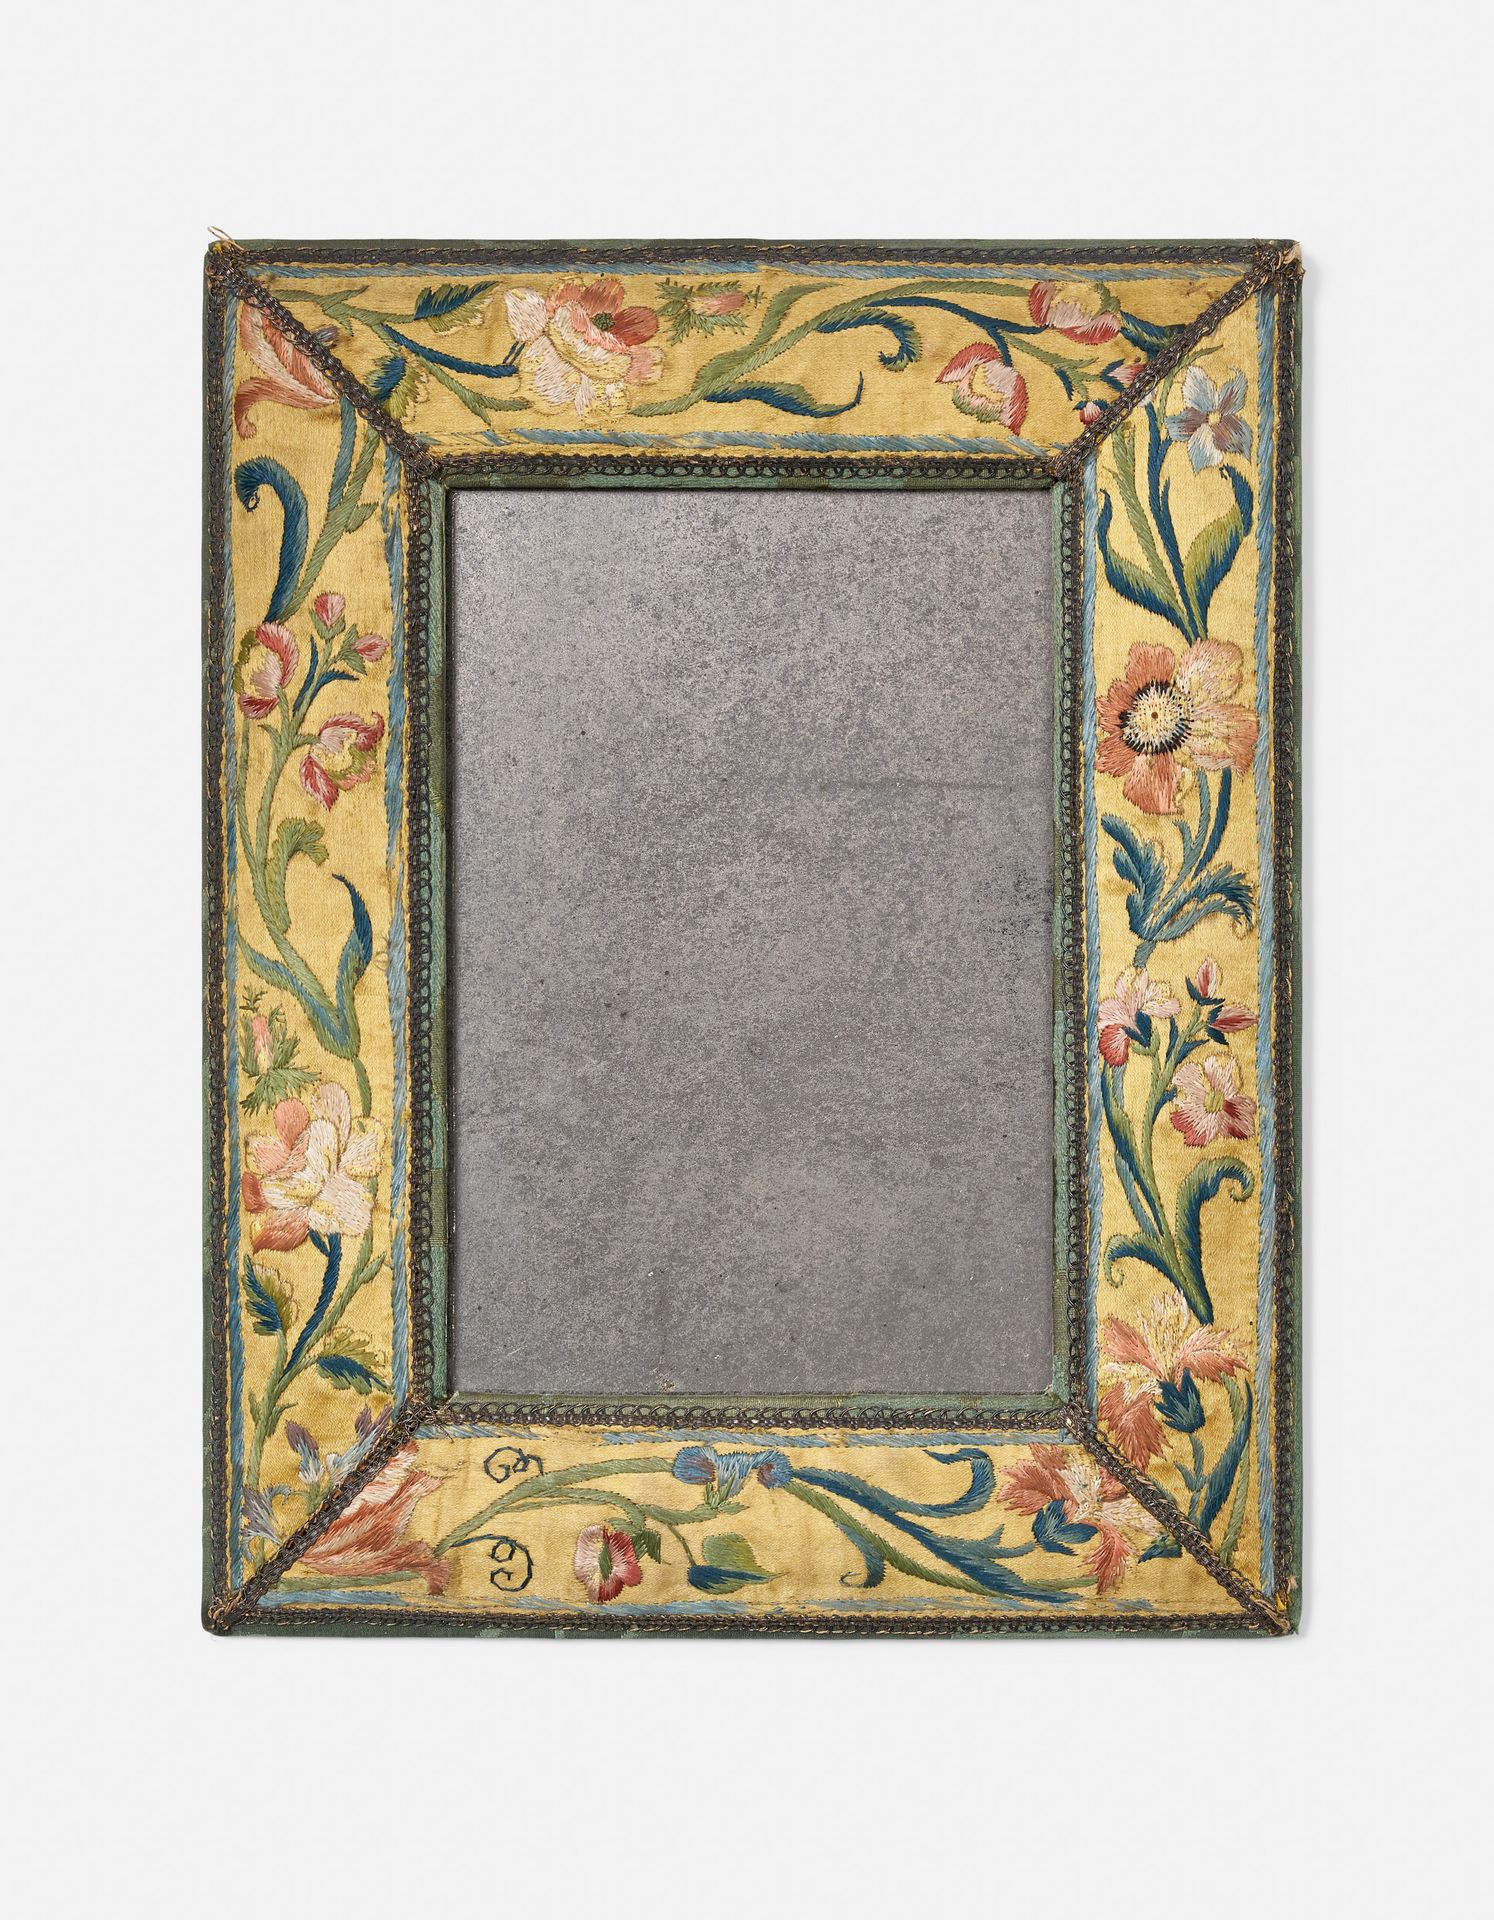 Null SILK MIRROR

England, 18th century 

The silk embroidered with foliage and &hellip;